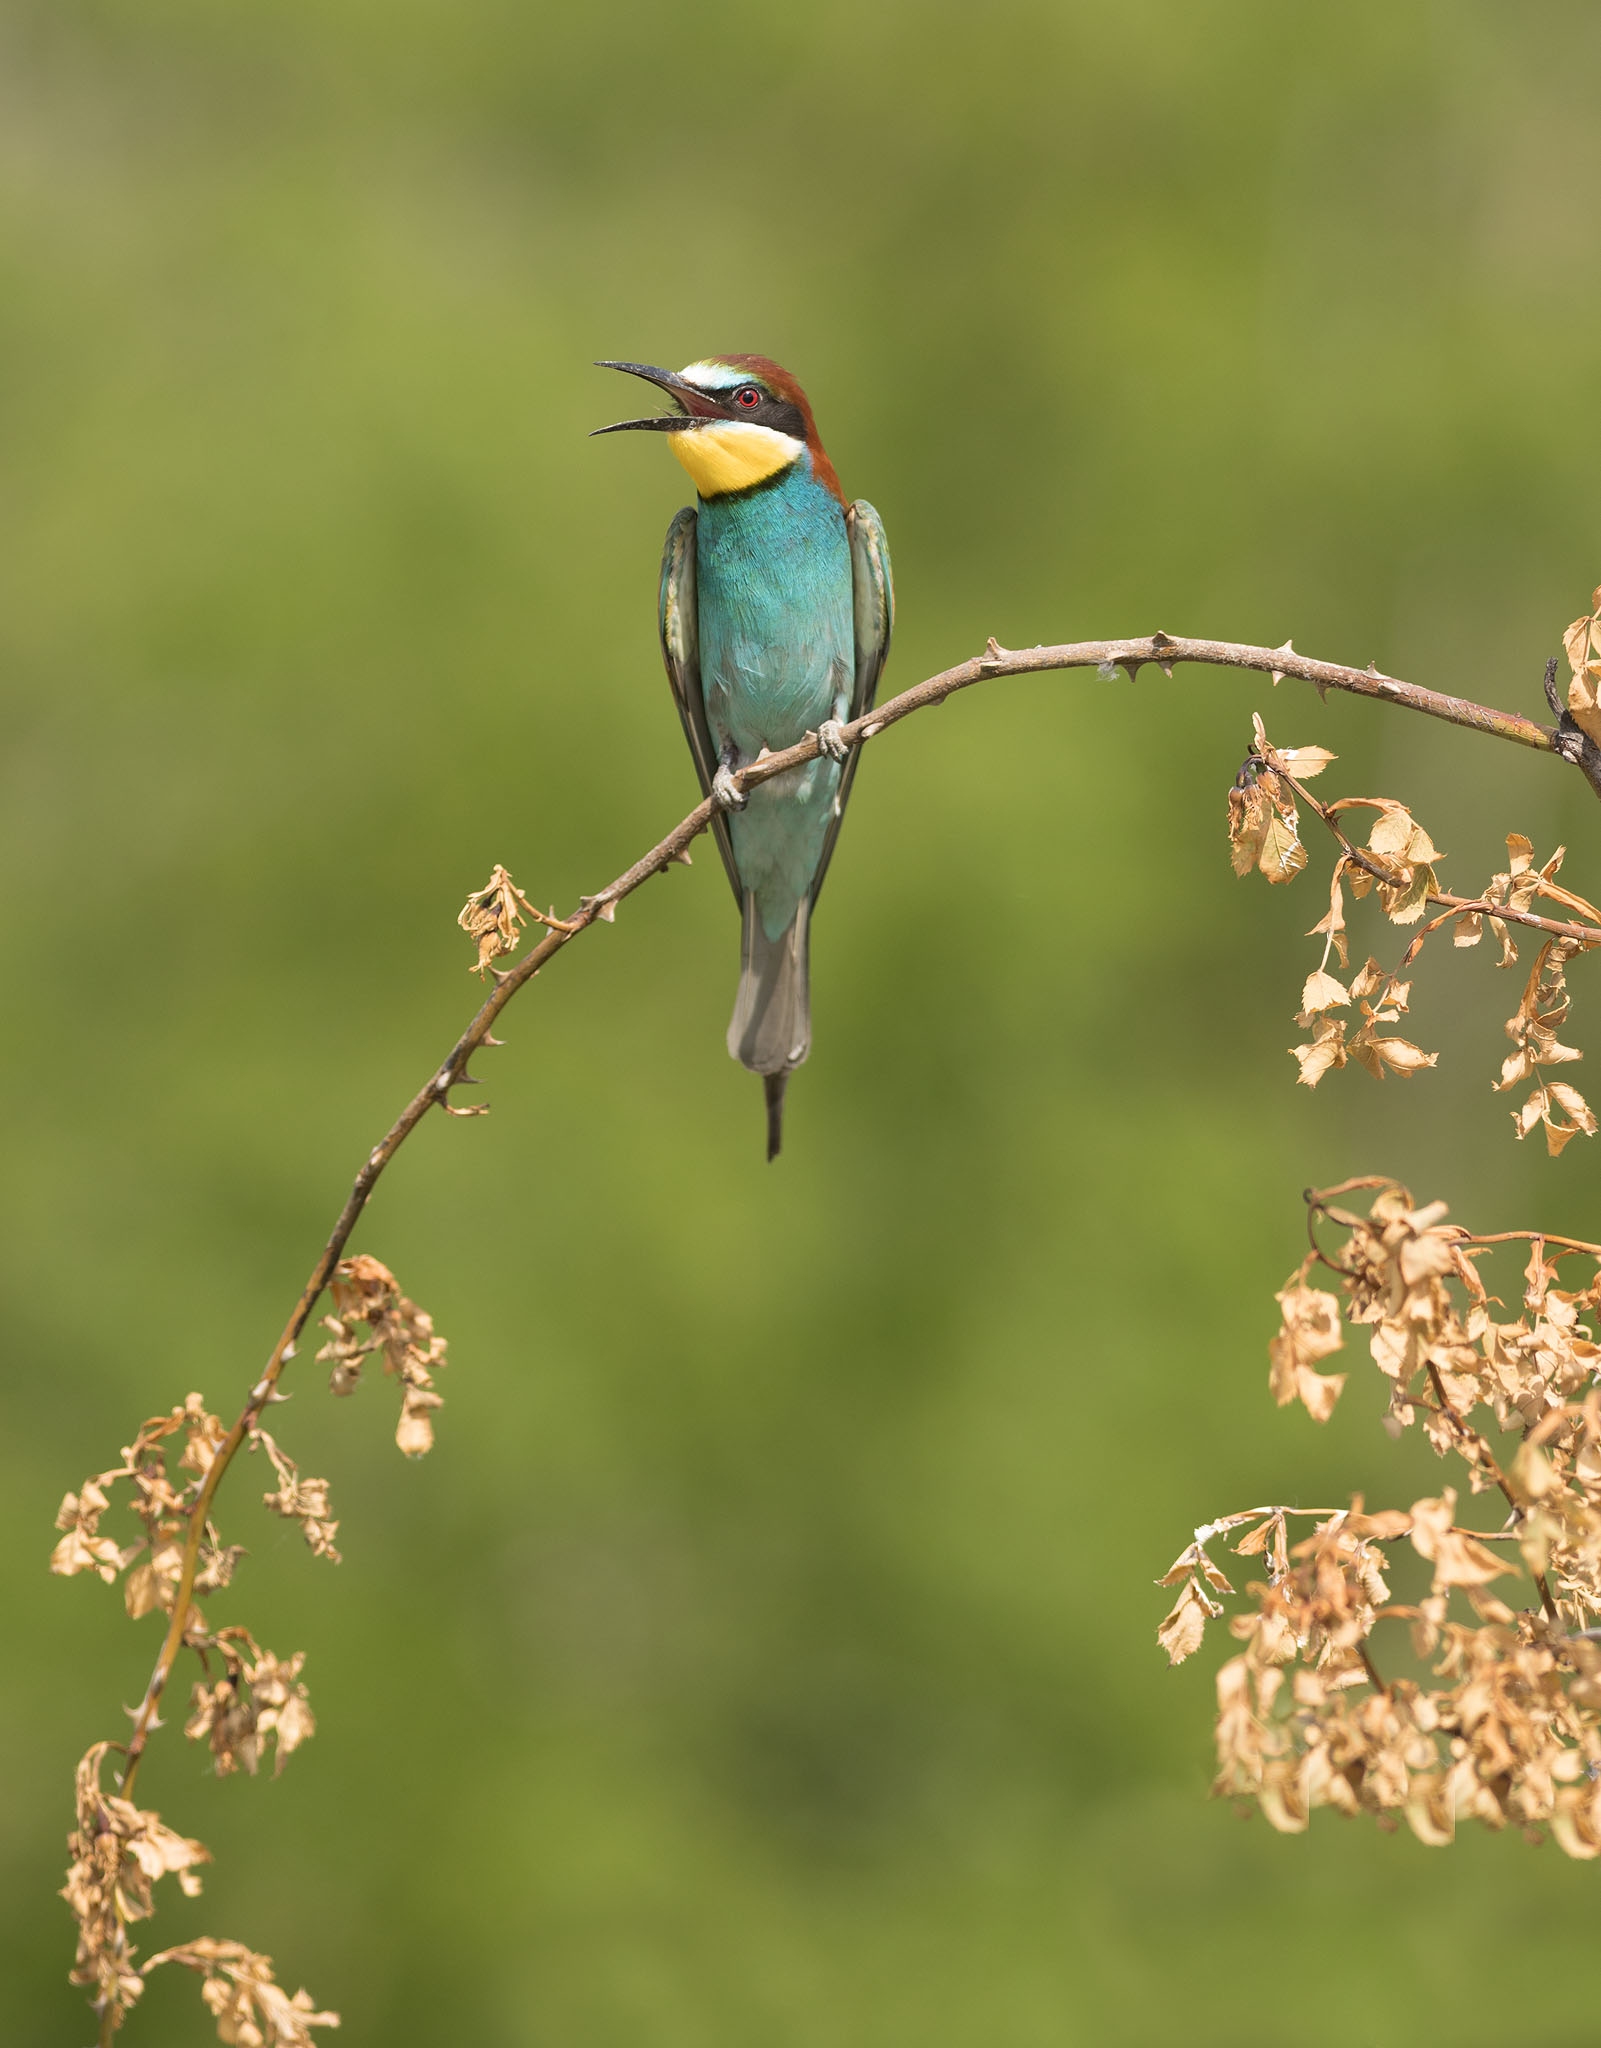 european bee-eater calling on perch in evening light in serbia